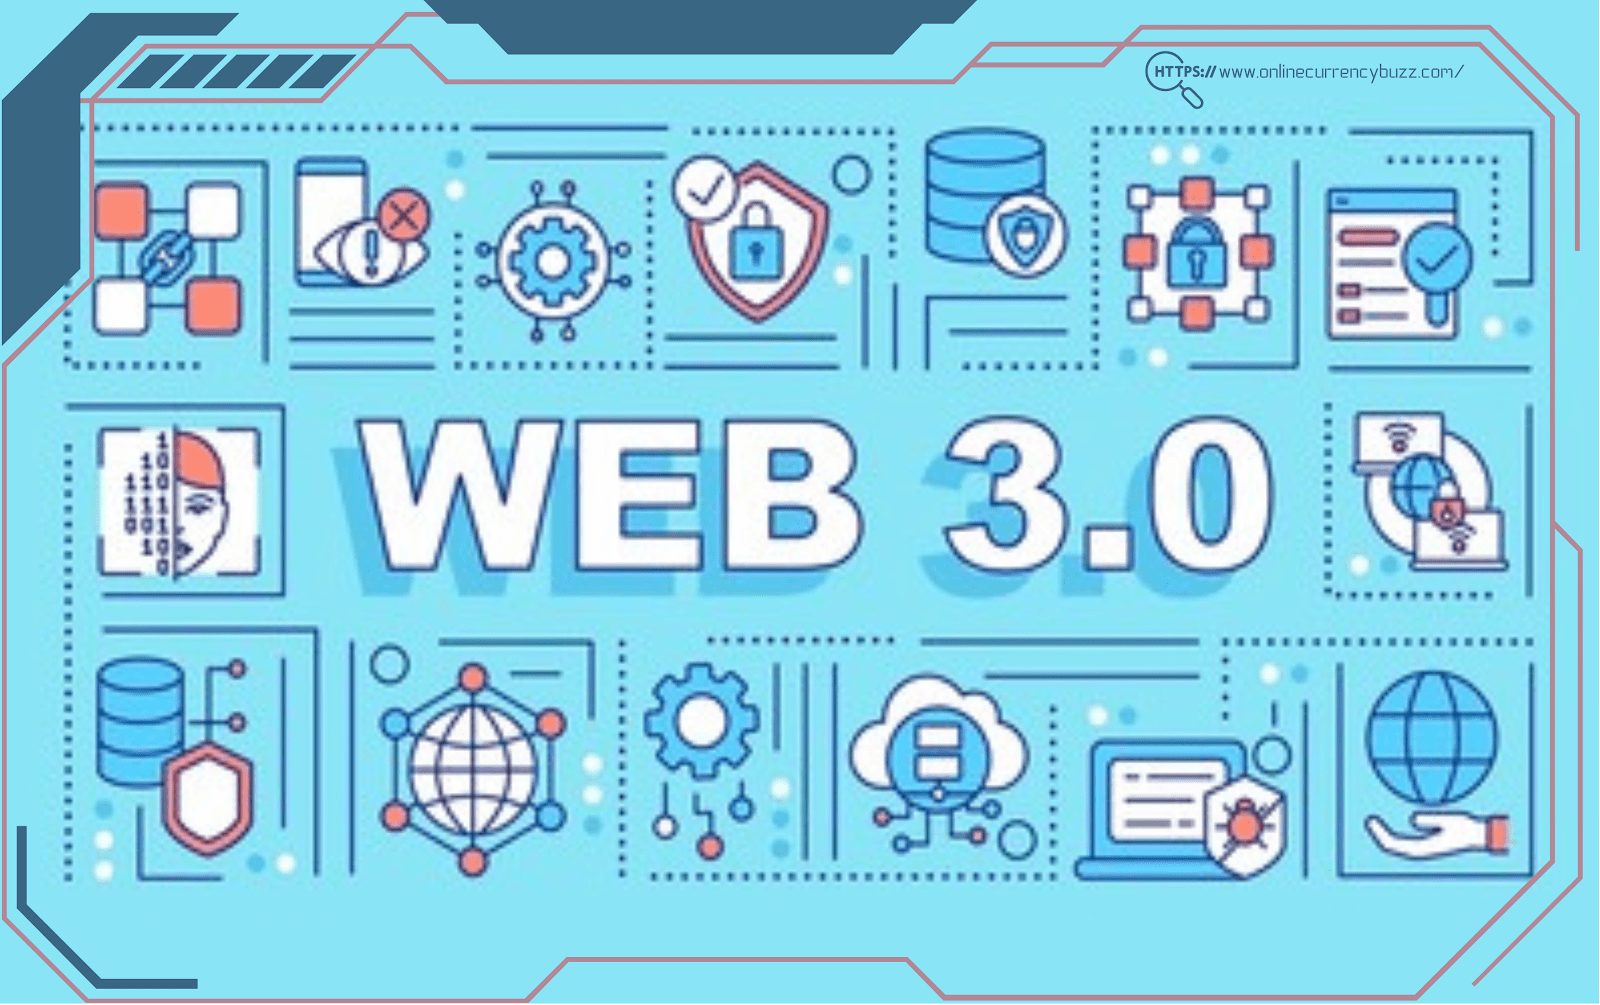 Definition of Web 3.0